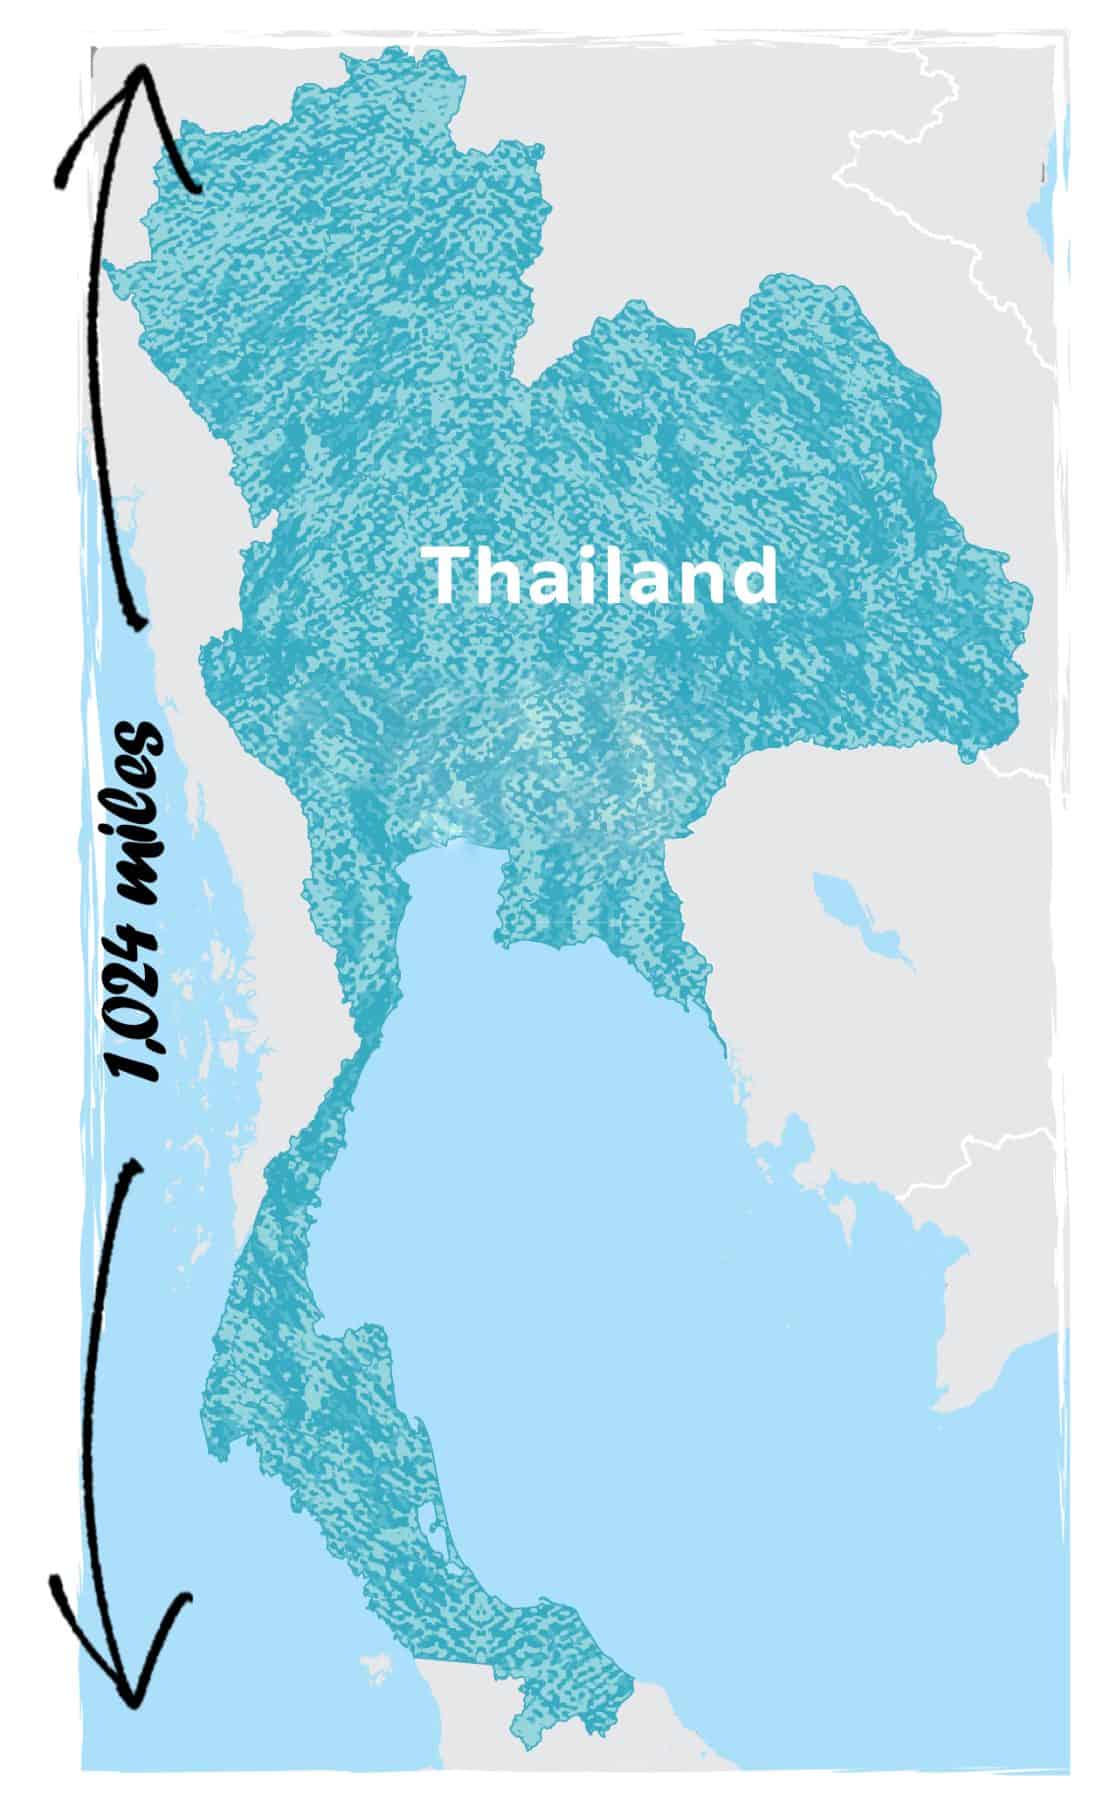 Map of Thailand showing what the length of thailand is in miles and how much we want our runners to collectively run for SCT's Global Run Event 